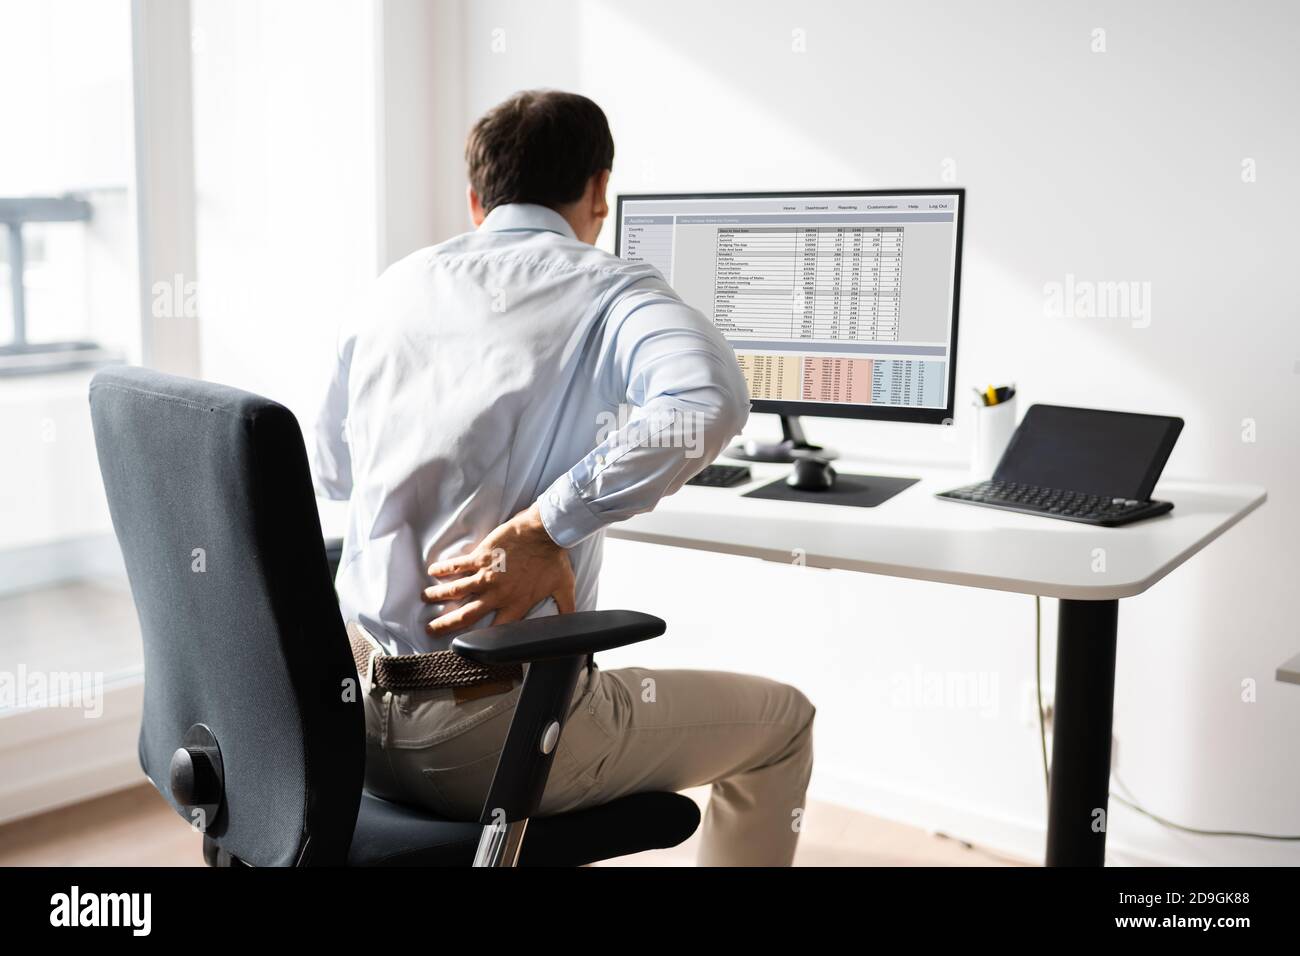 Bad Posture Office Desk Chair Back Pain Stock Photo - Alamy